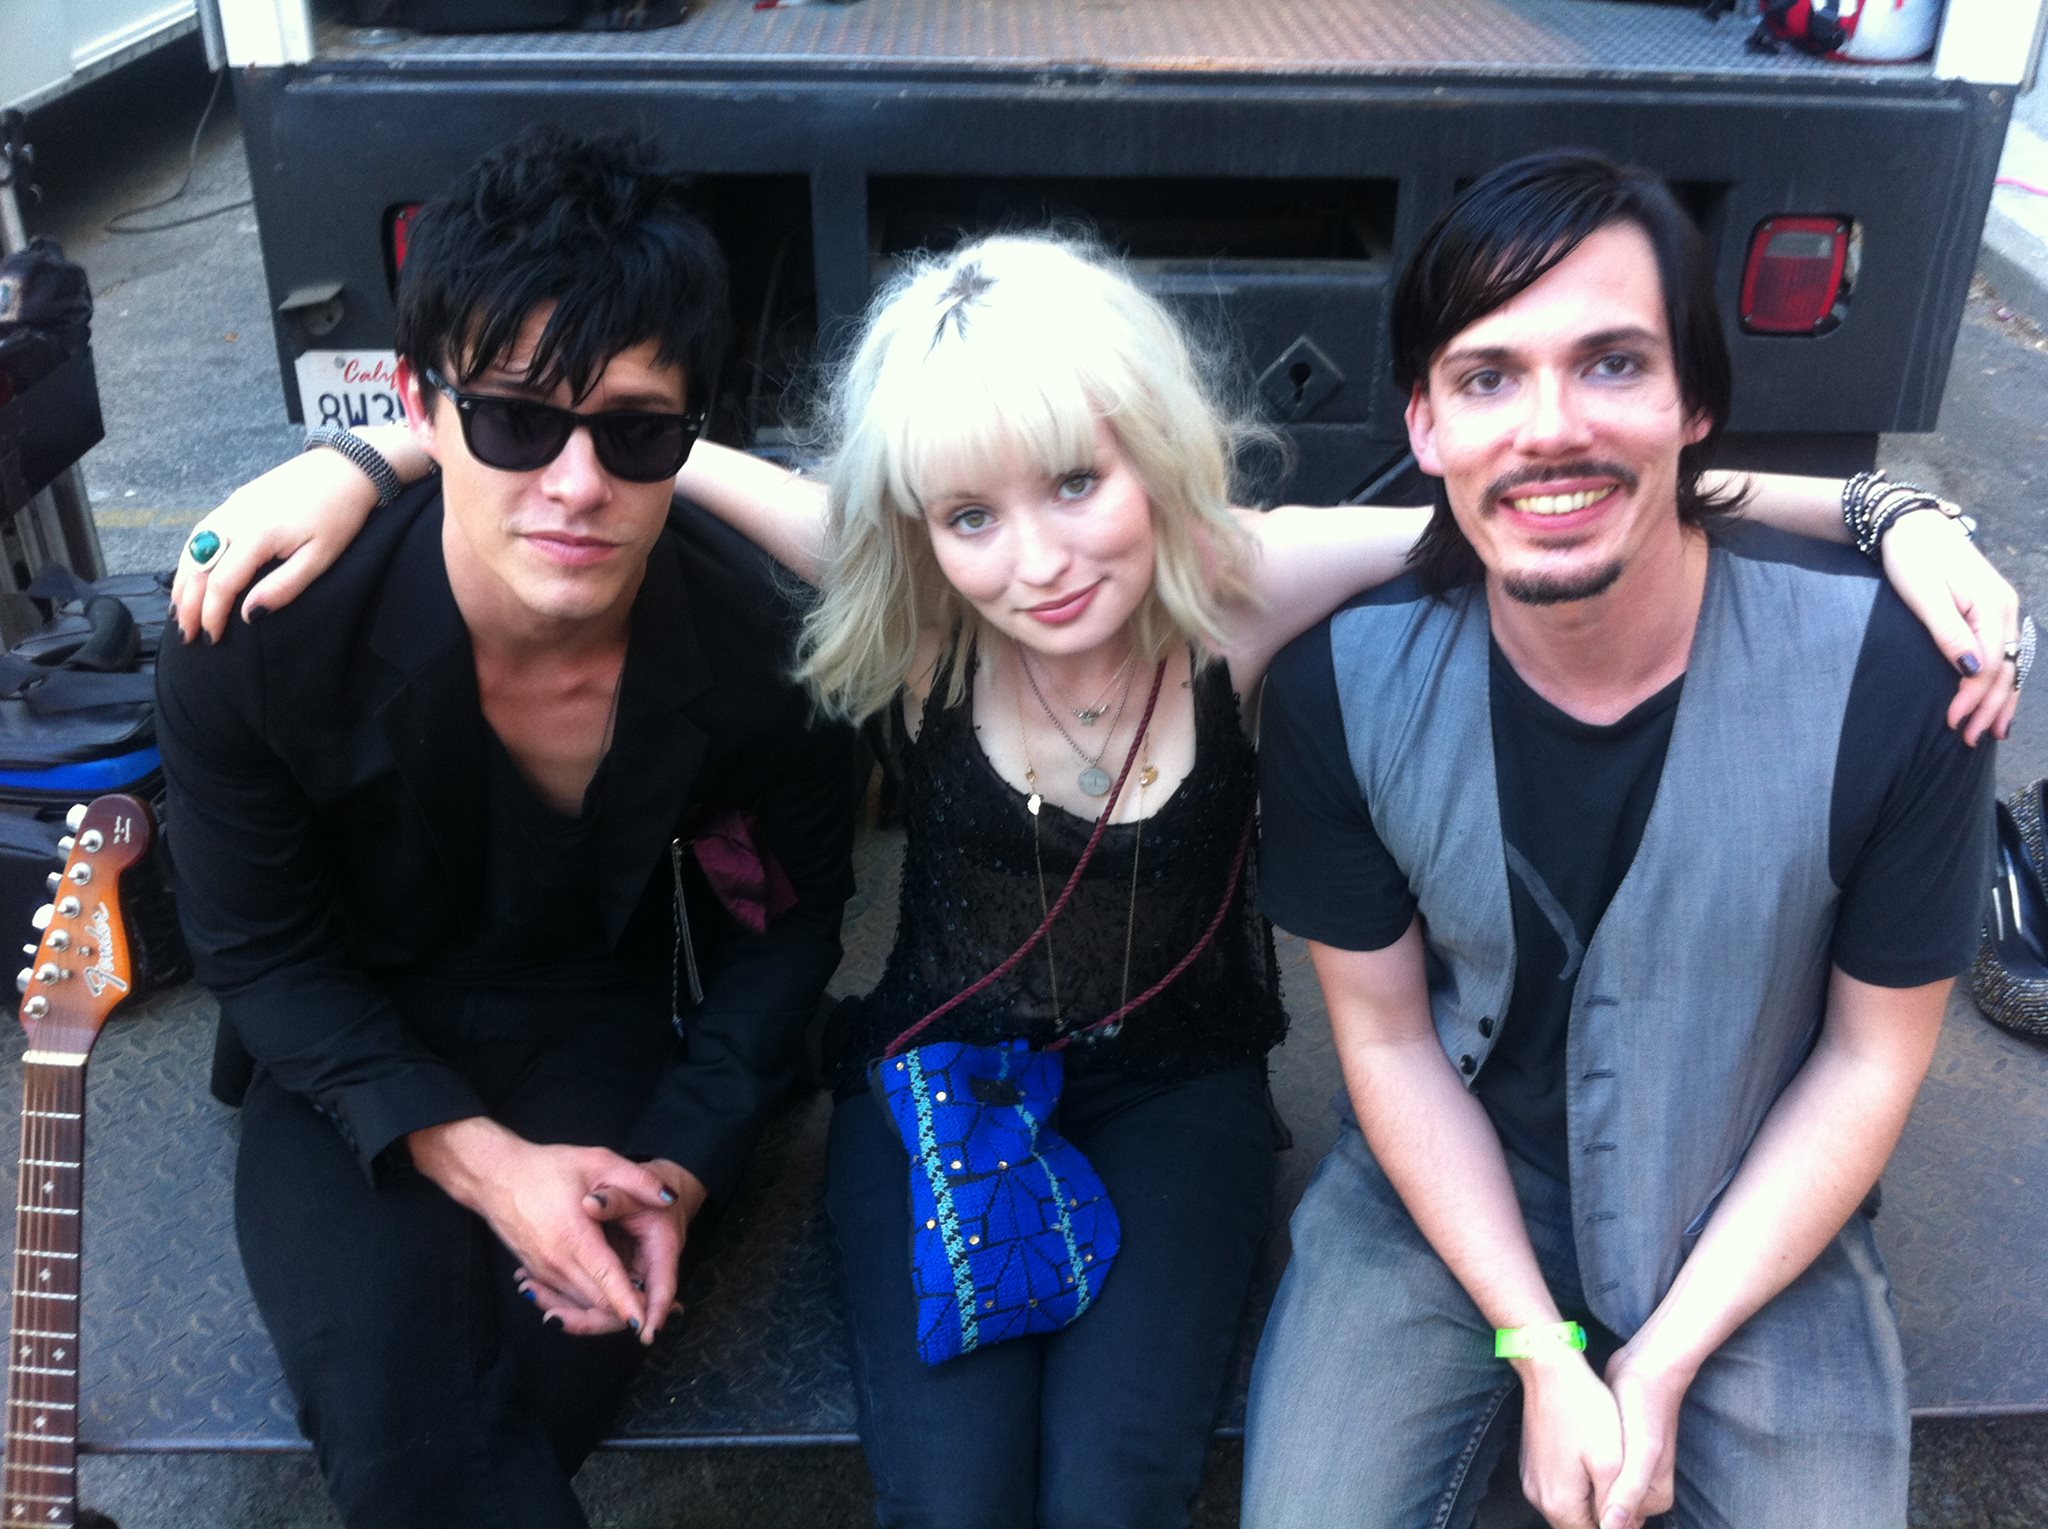 onset for Plush with Emily Browning and Xavier Samuel